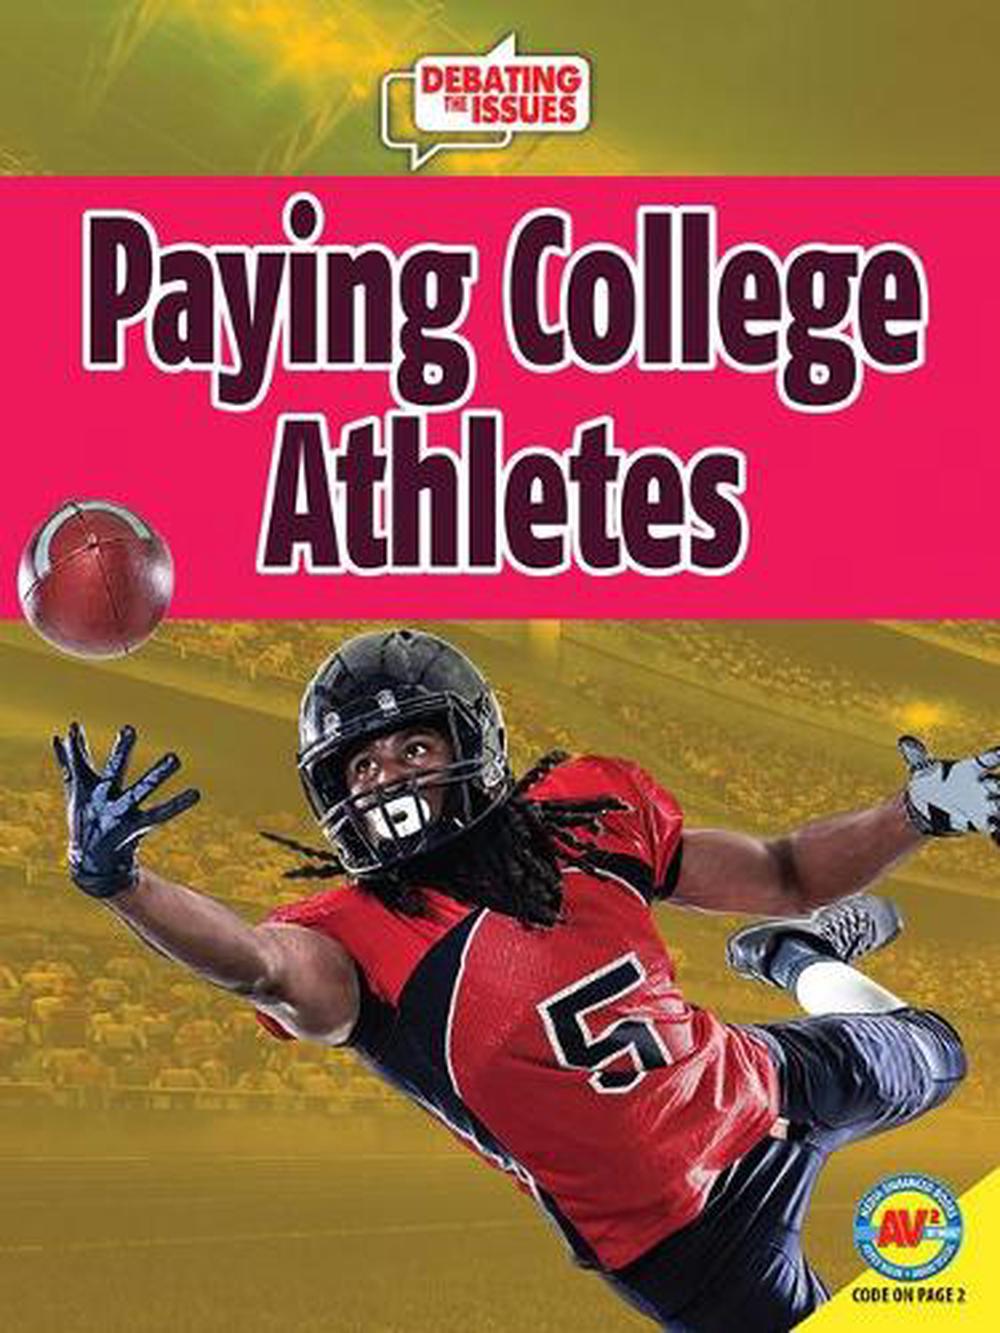 thesis for paying college athletes